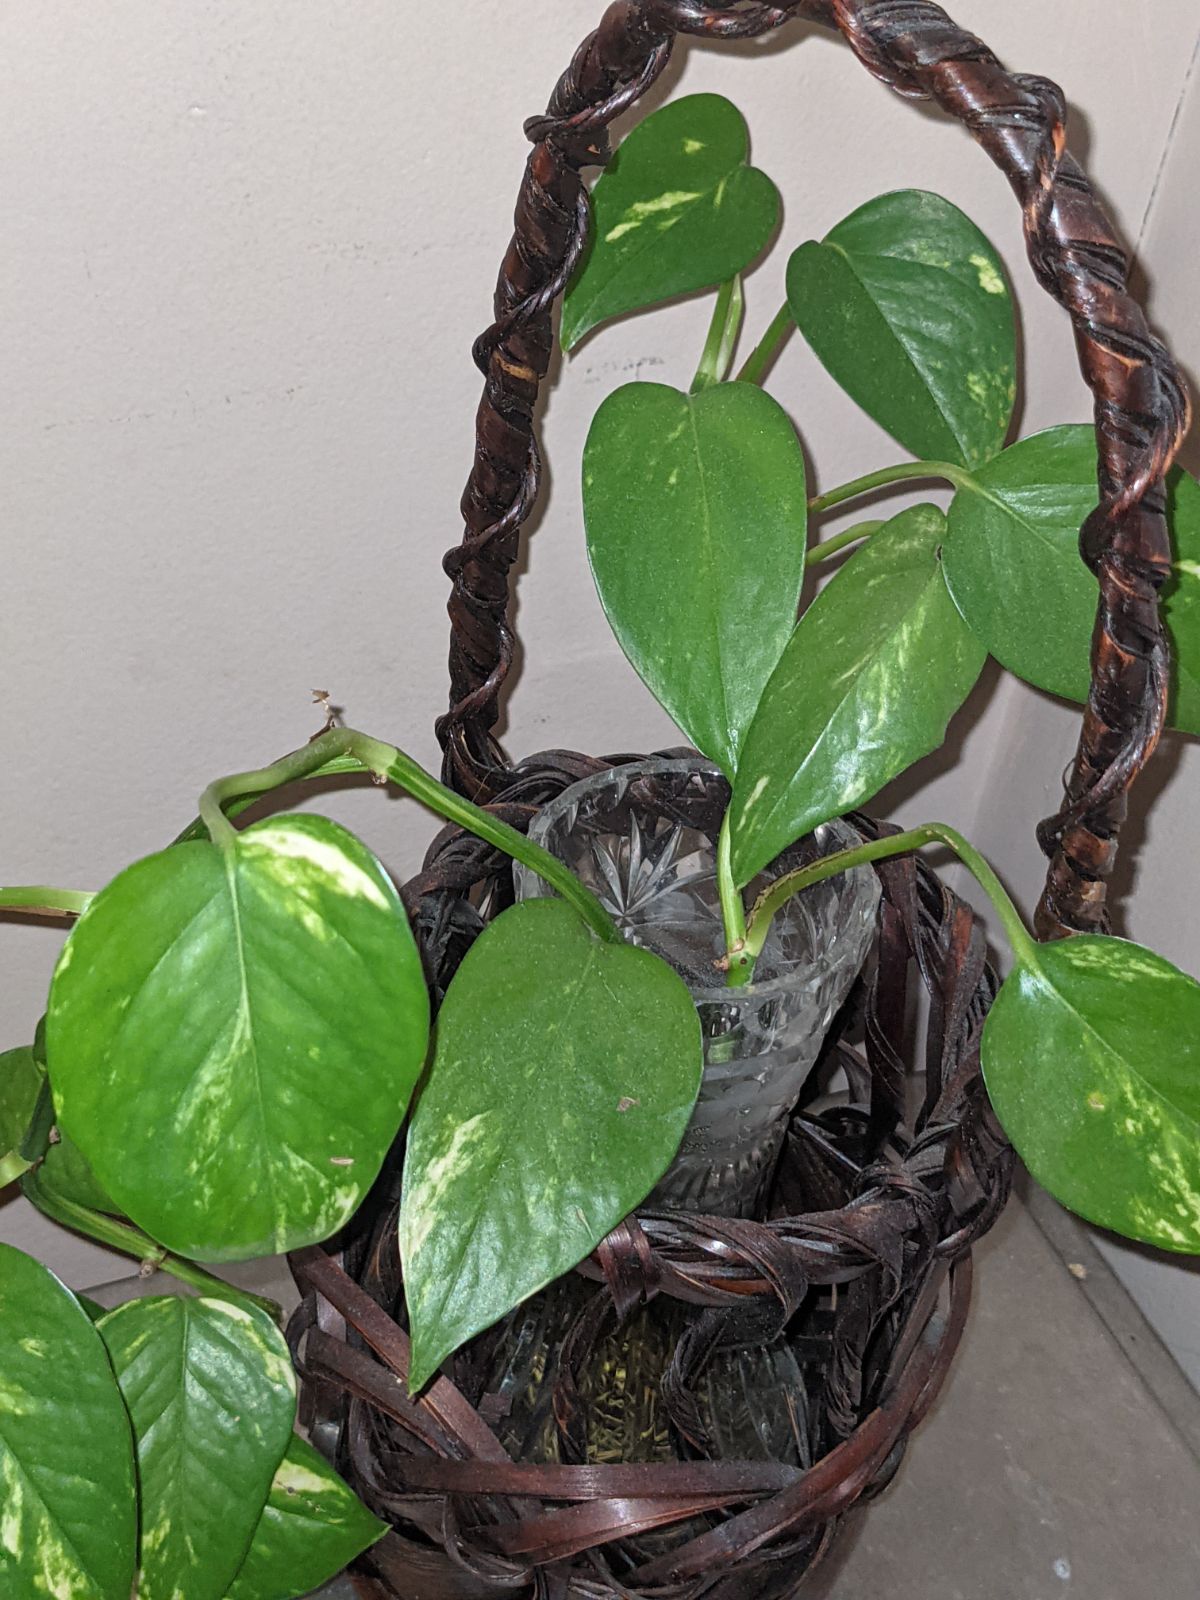 Grandmother's Pothos houseplant growing in a vase